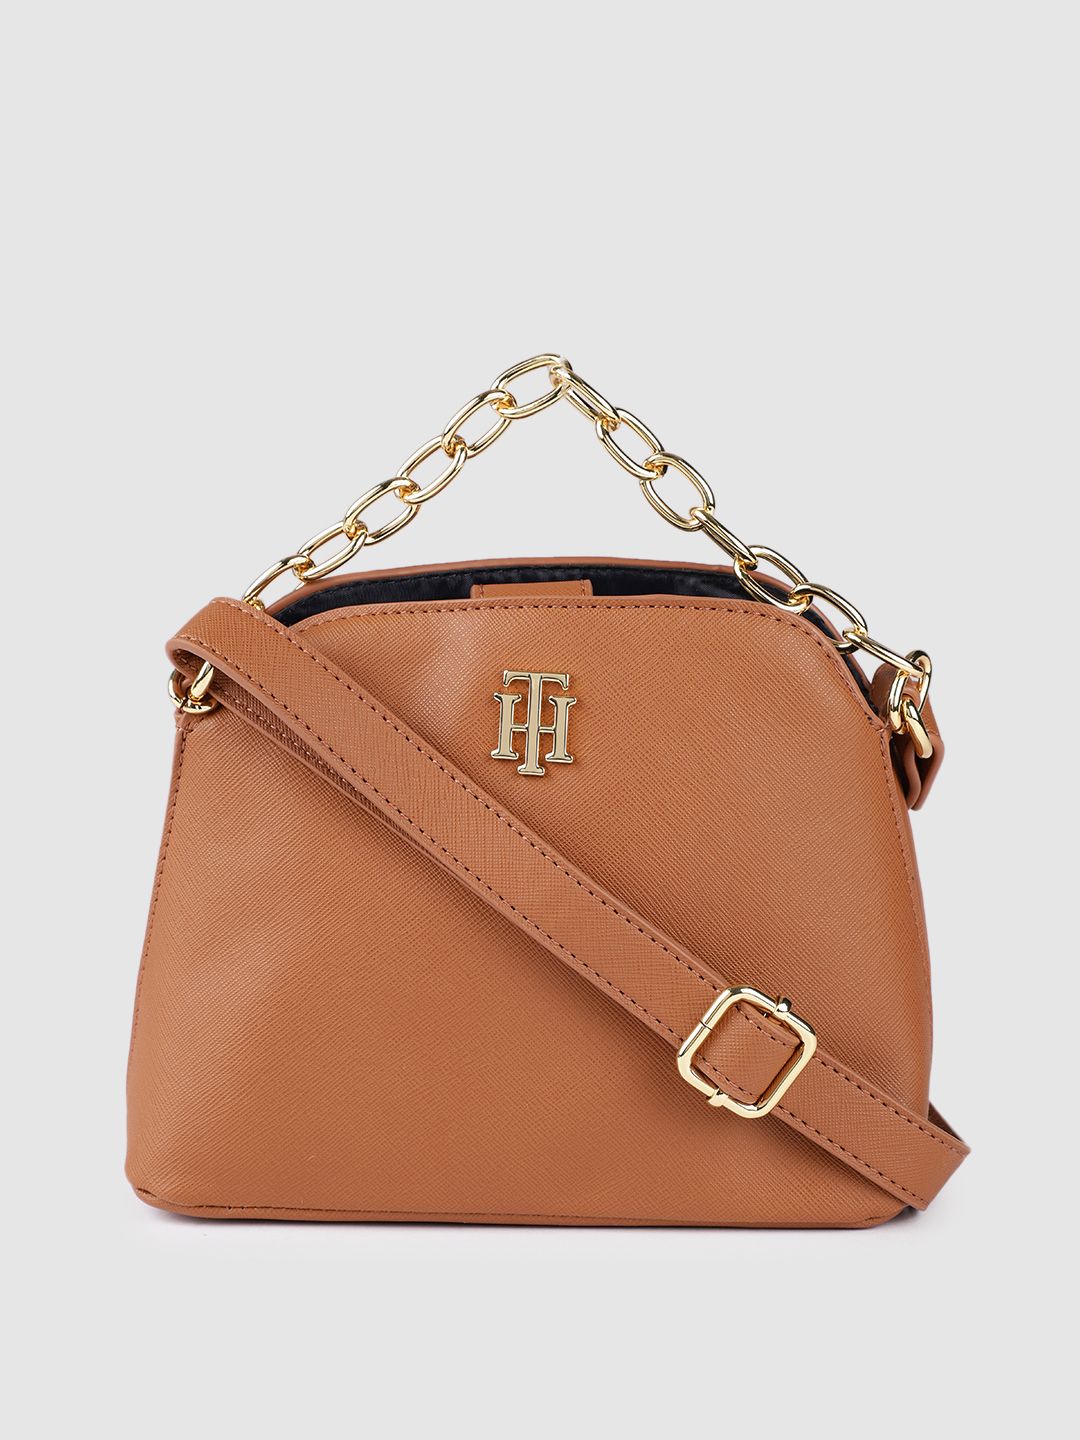 Tommy Hilfiger Brown Solid Structured Sling Bag Price in India